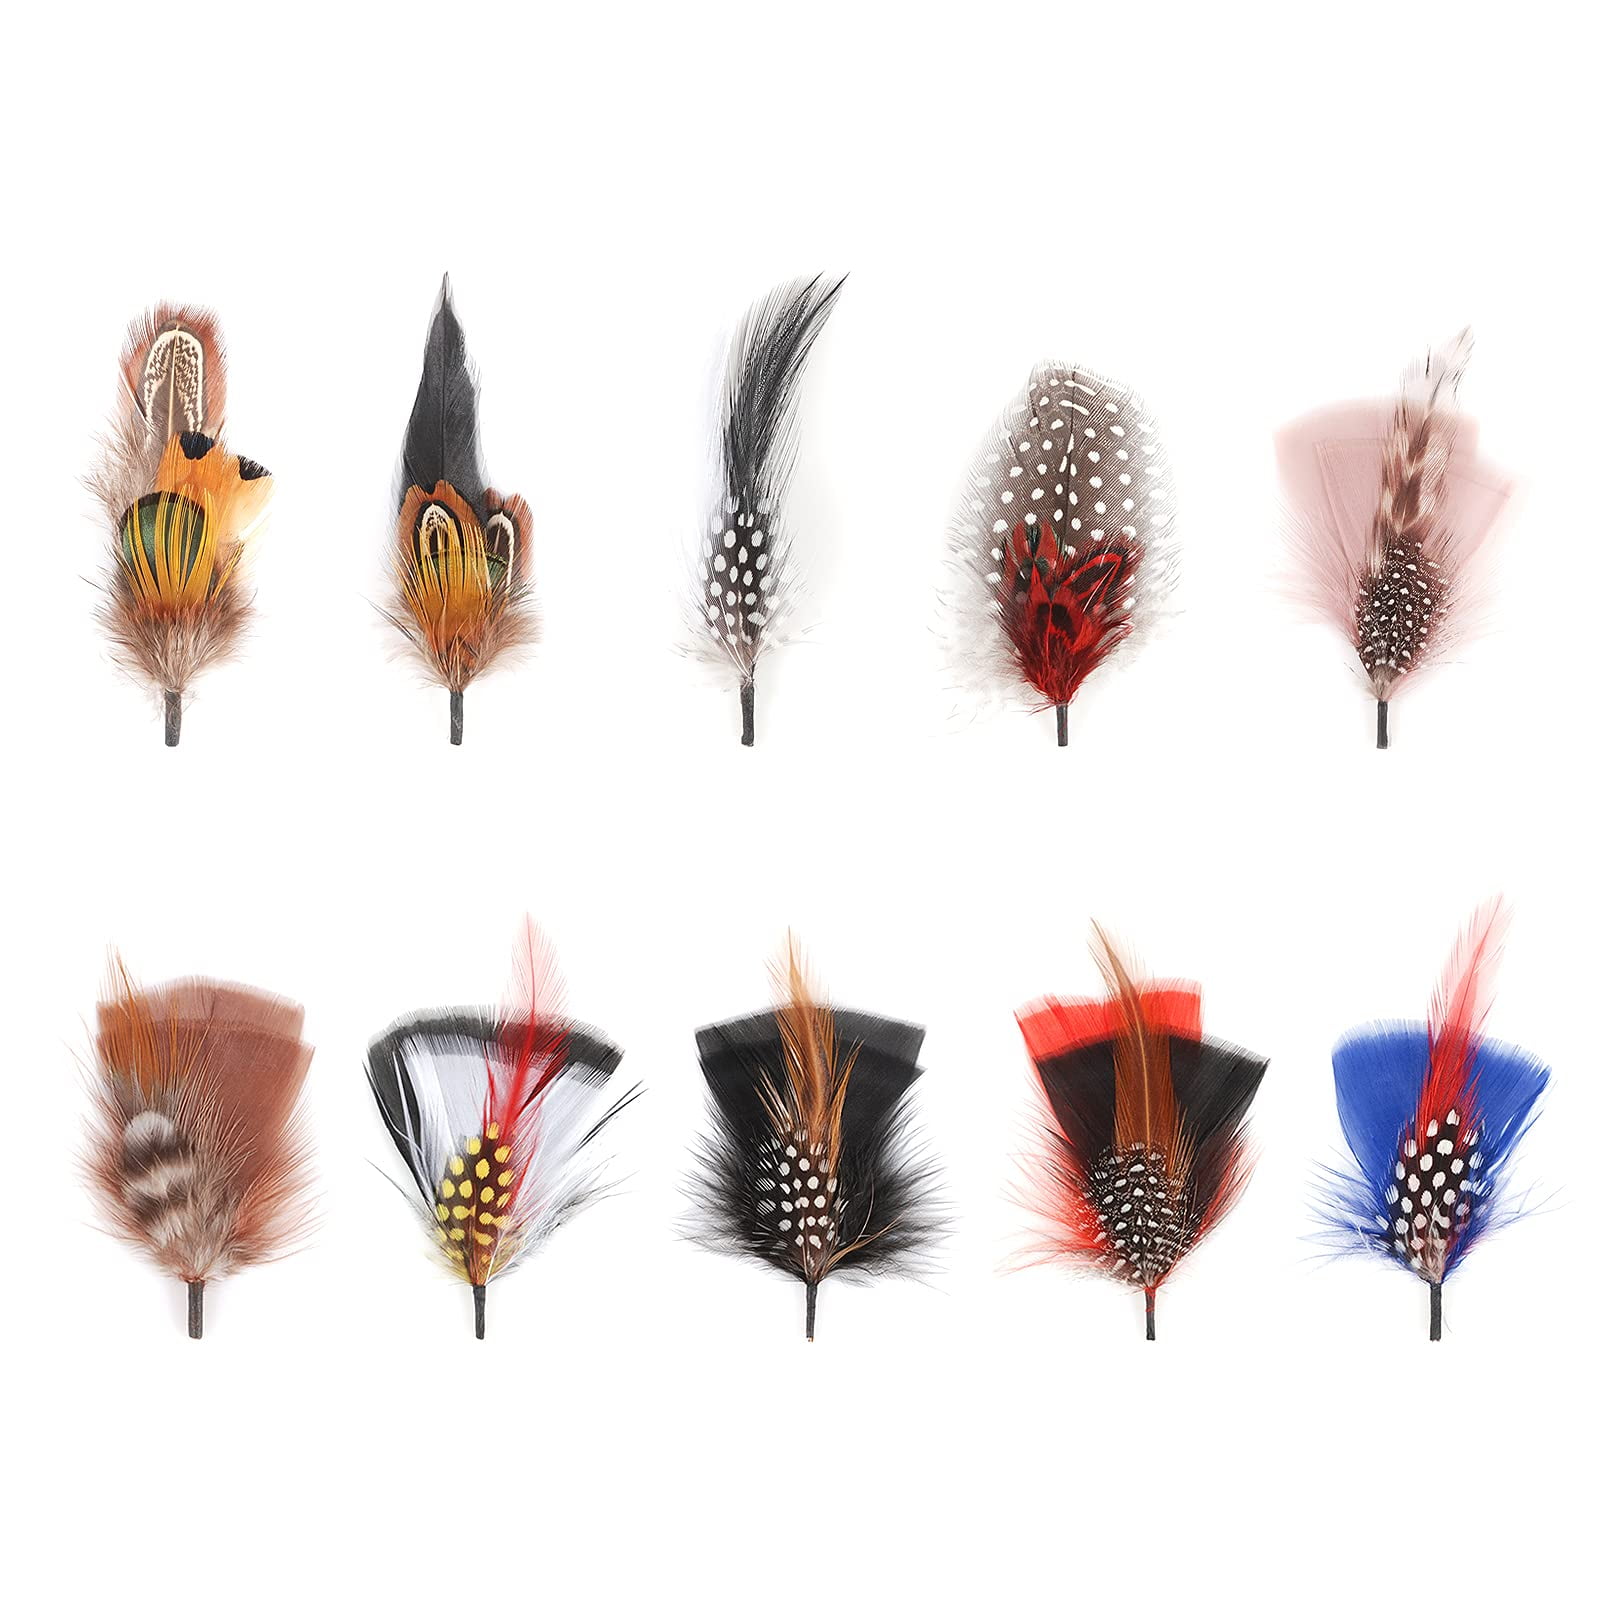 BTREEFLO Hat Feathers, 12 PCS Assorted Natural Feathers Colorful Real  Feathers Packs Accessories for Fedora Scott Borges Trilby Hats (#1)